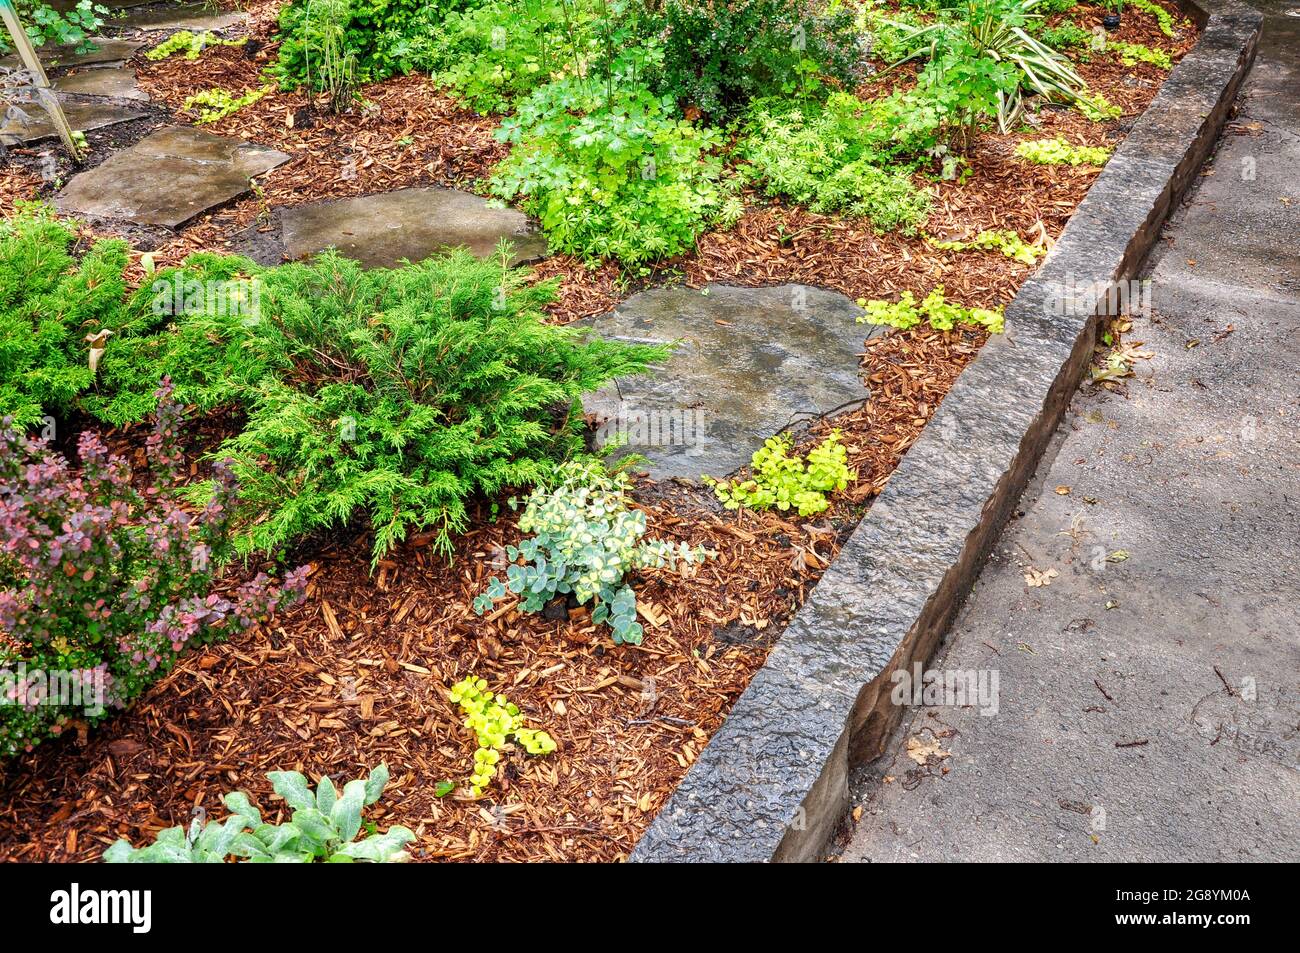 Flagstone stepping stones create a meandering path through a woodland garden. Stock Photo